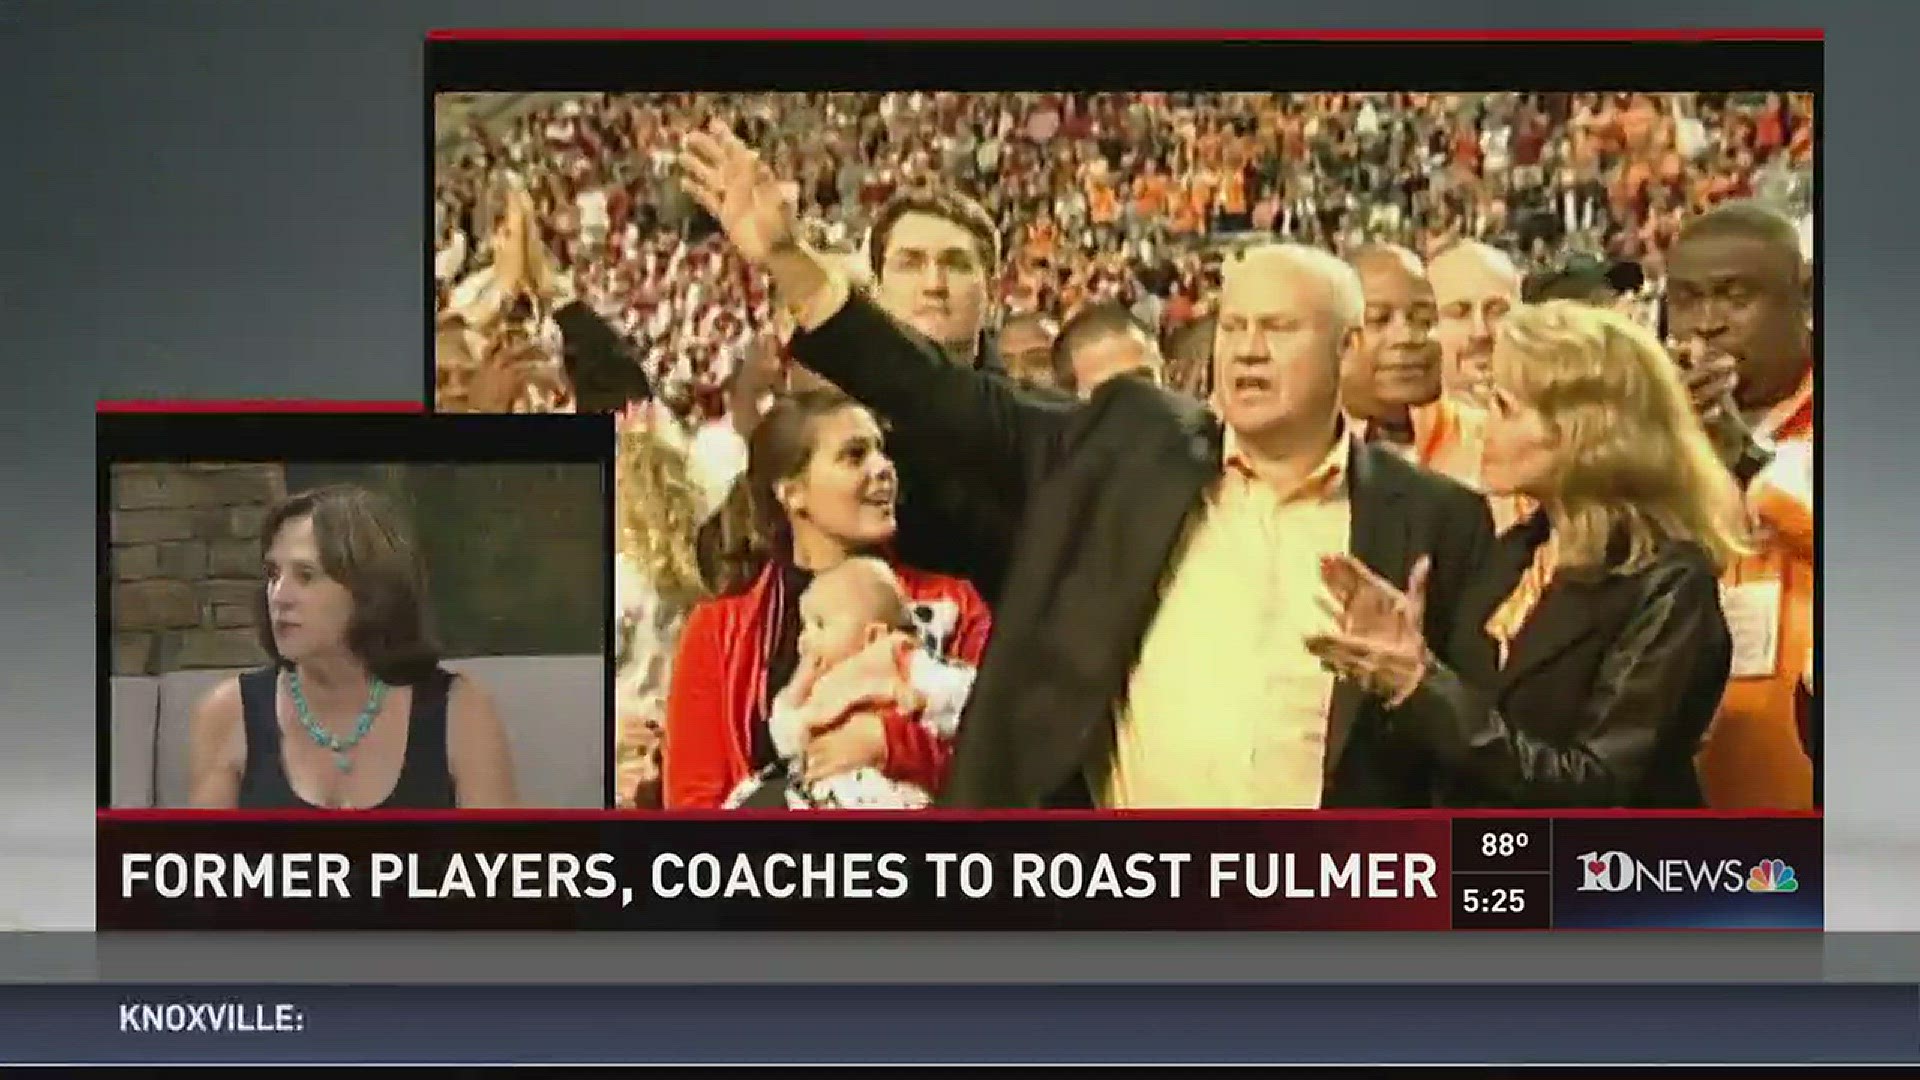 Former players and coaches will be "roasting" Phil Fulmer on June 26. Elaine Streno from Second Harvest Food Bank and Fred White, a former UT player from the 1998 championship team, join WBIR to talk about the event. (6/15/16)